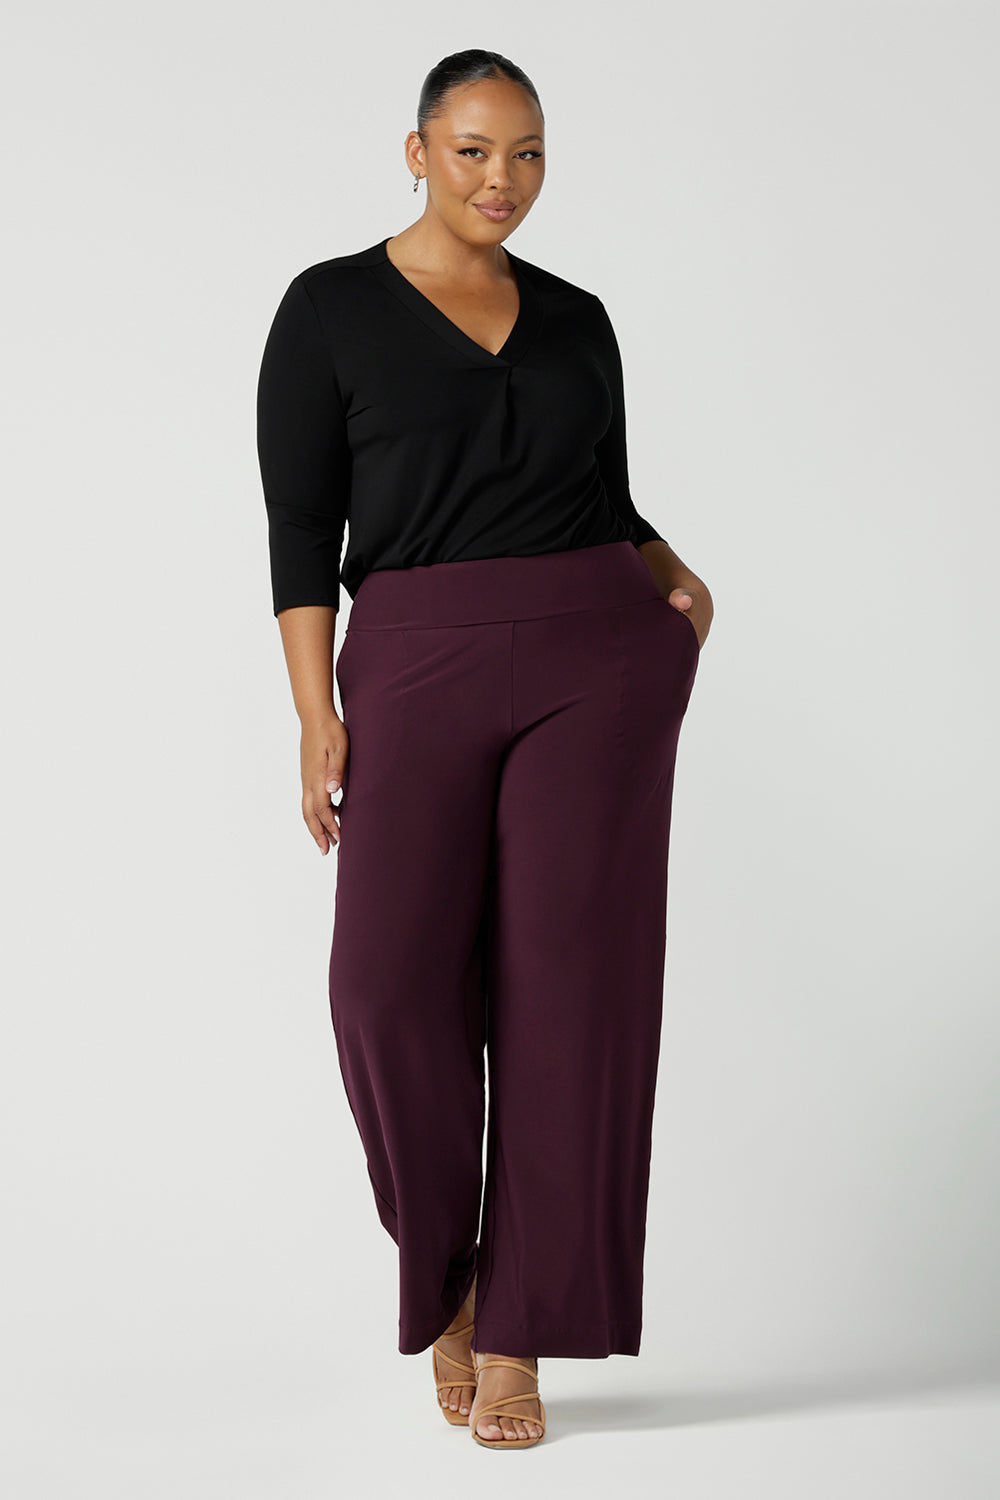 Black Bamboo pleat front top on a size 18 curvy woman. With a 3/4 sleeve and high-low hem, this top is a great women’s work top for corporate wear.  Styled back with a mulberry workwear corporate pant tube skirt. Designed and made in Australia for women sizes 8 - 24. Leina and Fleur. 